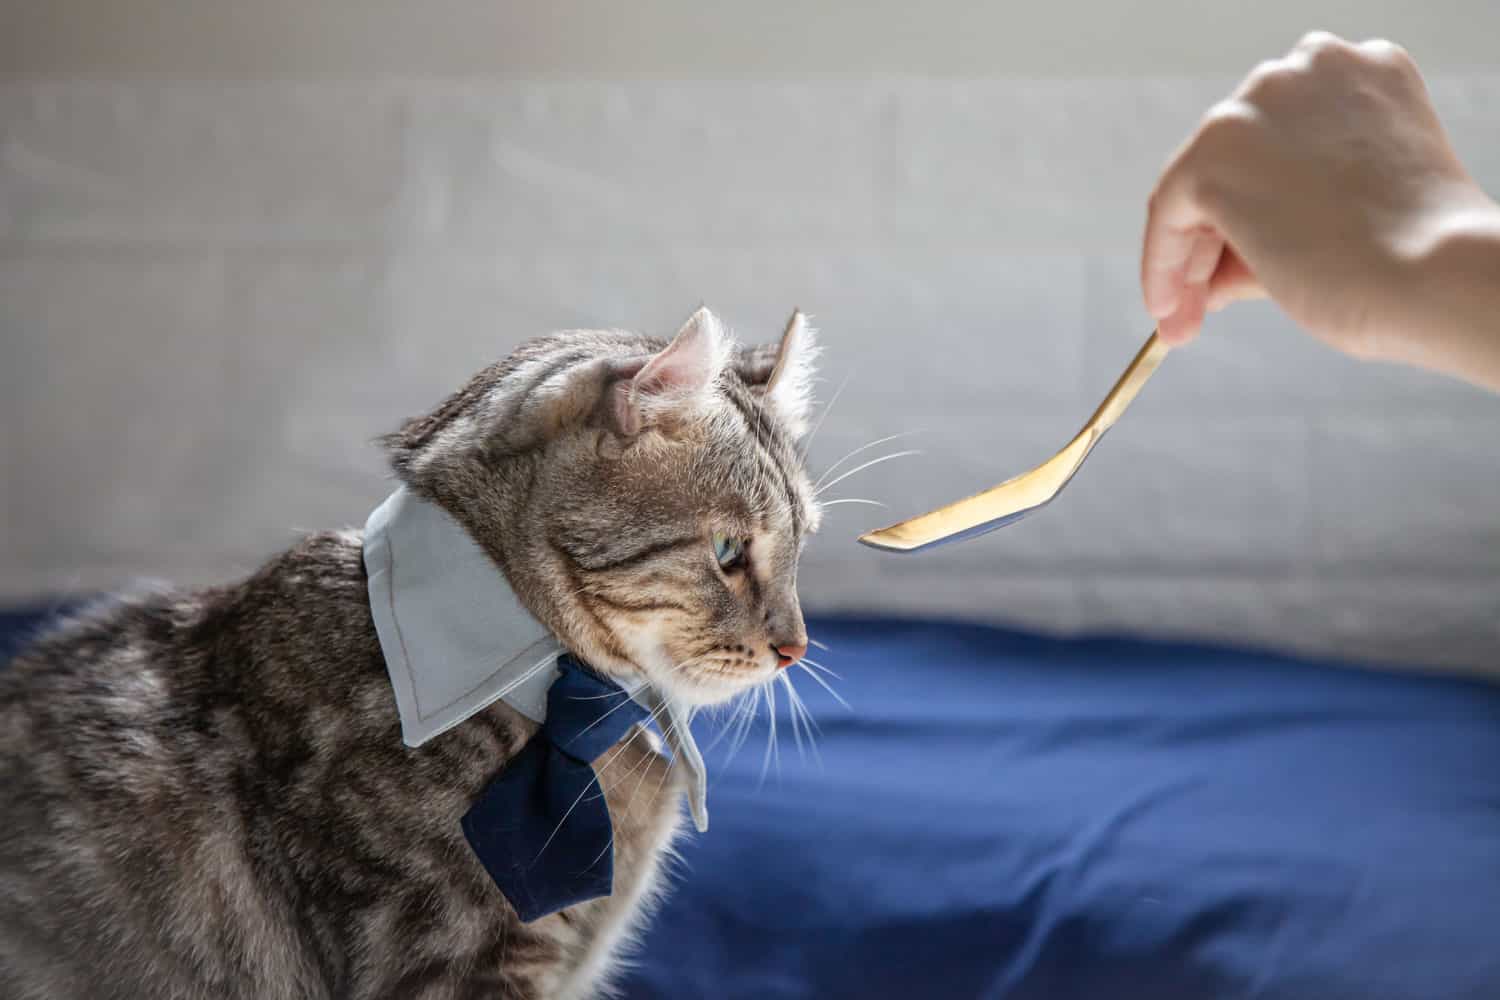 The owner is using a golden spoon to feed food to a cat with anorexia.